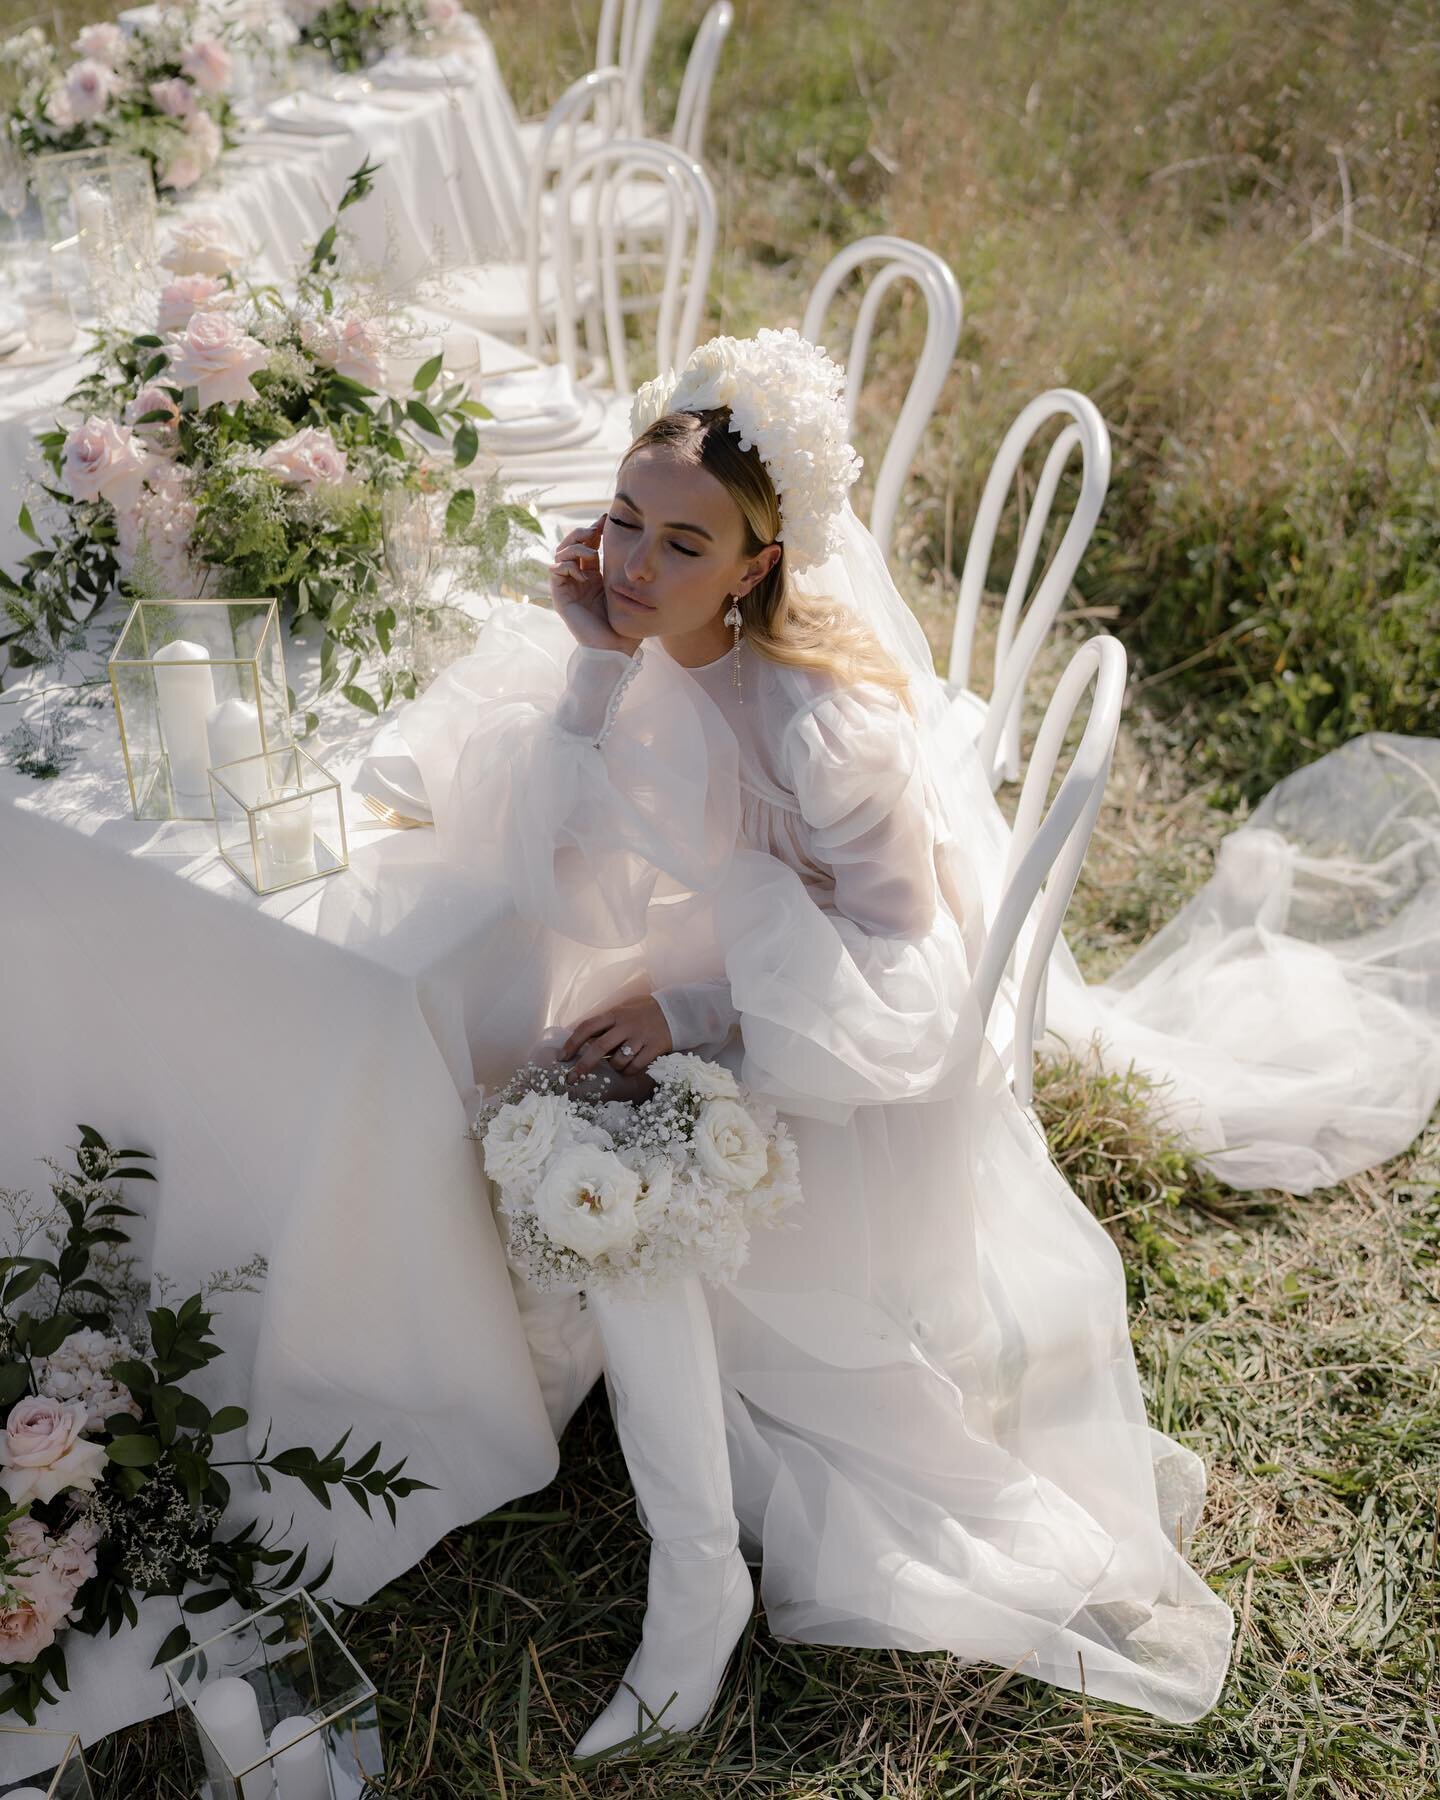 | EDITORIAL SHOOT |

So excited to share this dreamy collaborative styled shoot with you all and to introduce our new sister floral brand @sonadora_nz 

Stay tuned for some more gorgeous images from this shoot coming very soon. 

Photo | @haute.weddi